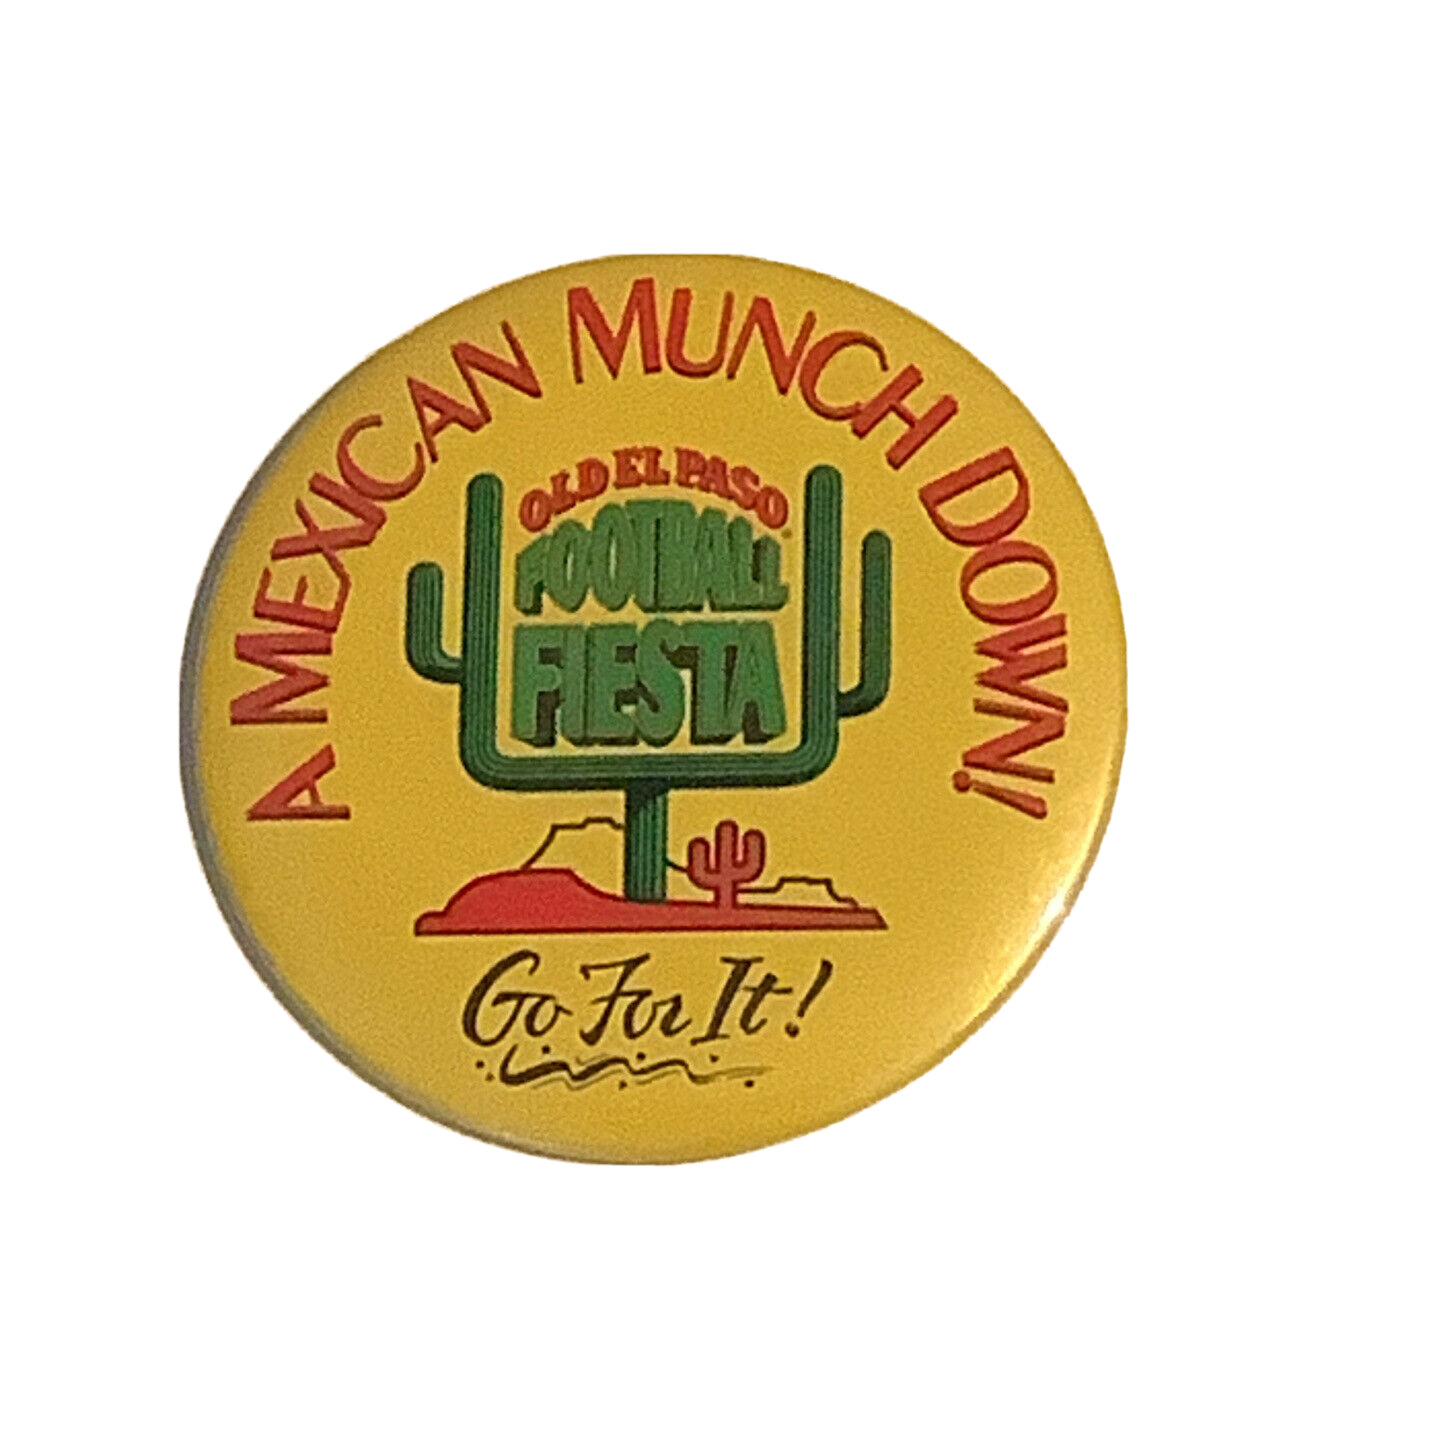 Old El Paso Pinback Button 3” “Mexican Munch Down” Vintage Food Advertisement